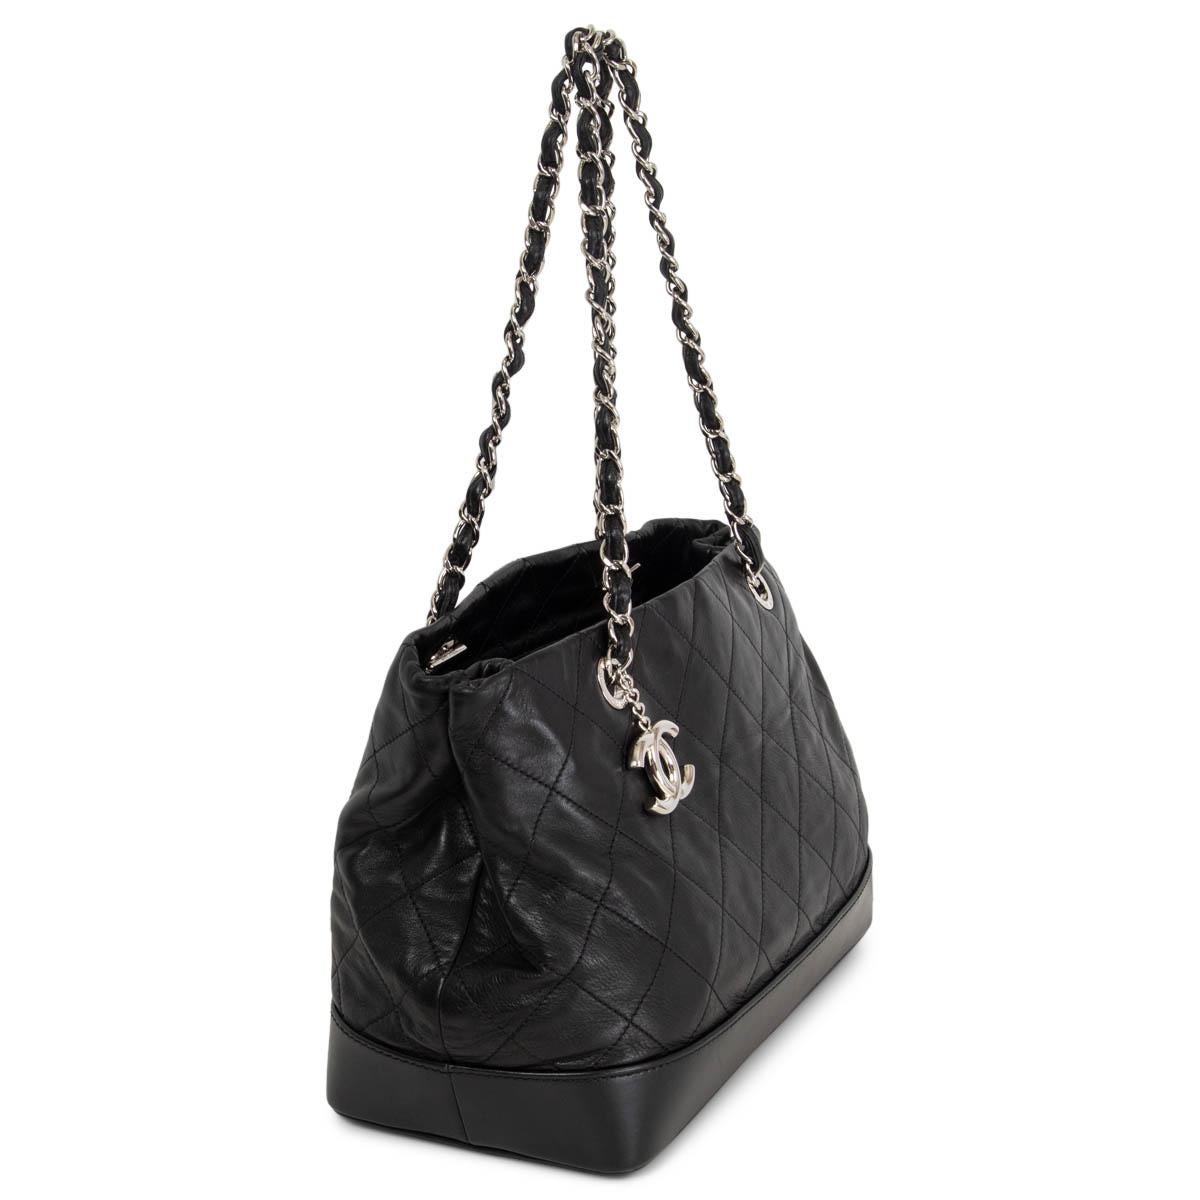 100% authentic  Chanel VIP Medium Shopping Bag in black iridescent smooth quilted calfskin with a hard bottom. Embellished with CC silver-tone metal charm and classic chain-link shoulder-straps. Opens with a zipper on top and is lined in beige